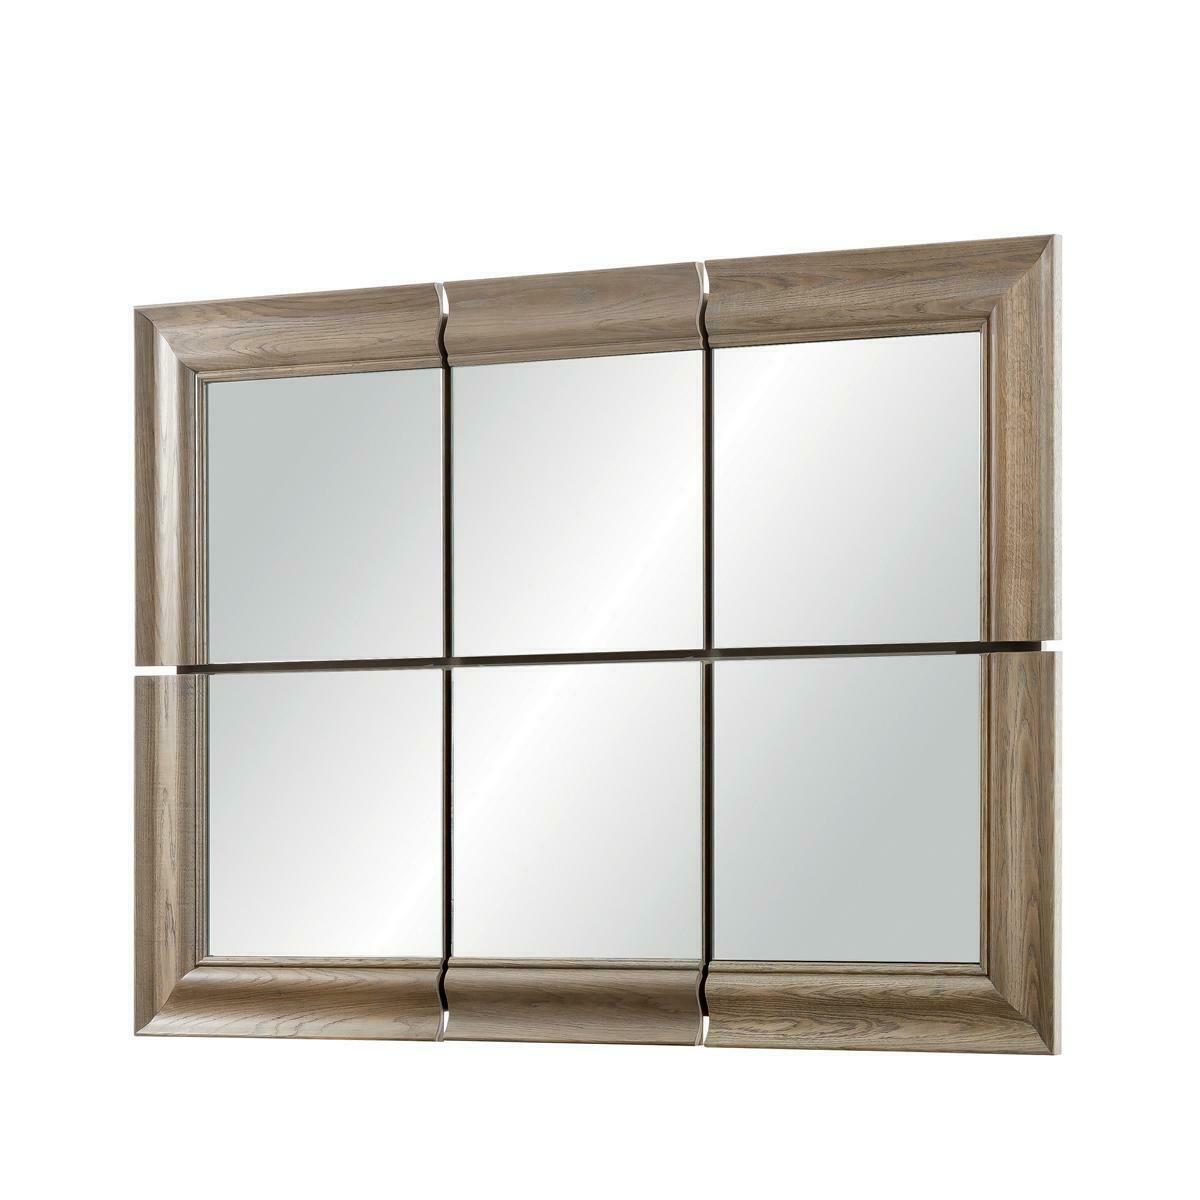 Modern large mirror wall mirror real wood frame hanging mirror new 146x105cm, model - CE-2